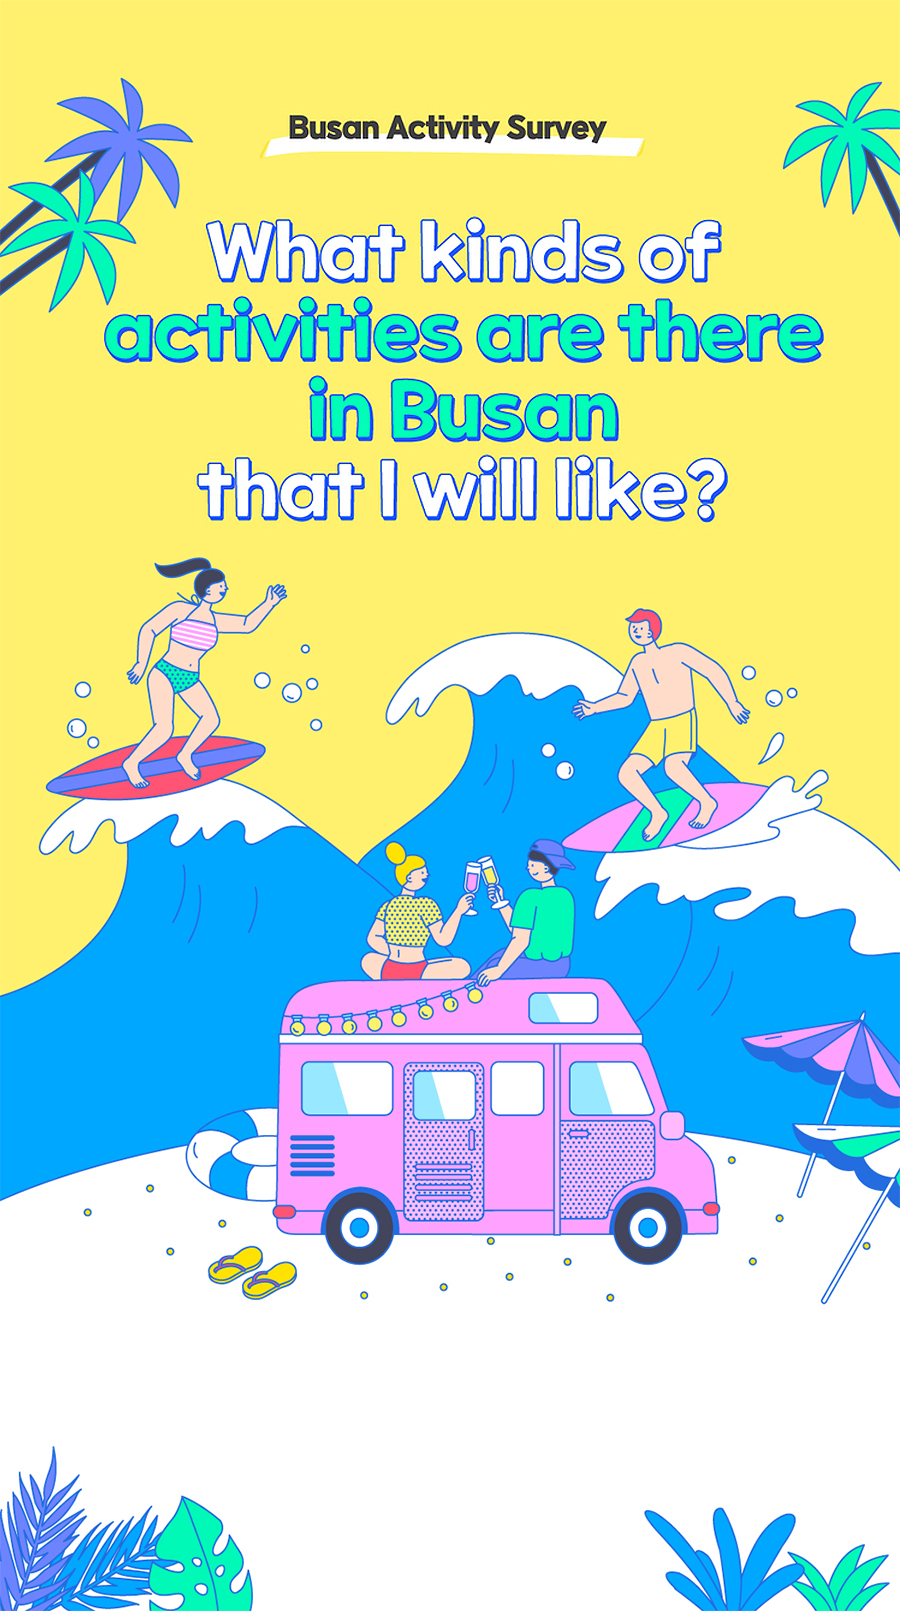 Busan Activity Survey. What kinds of activities are there in Busan that I will like?